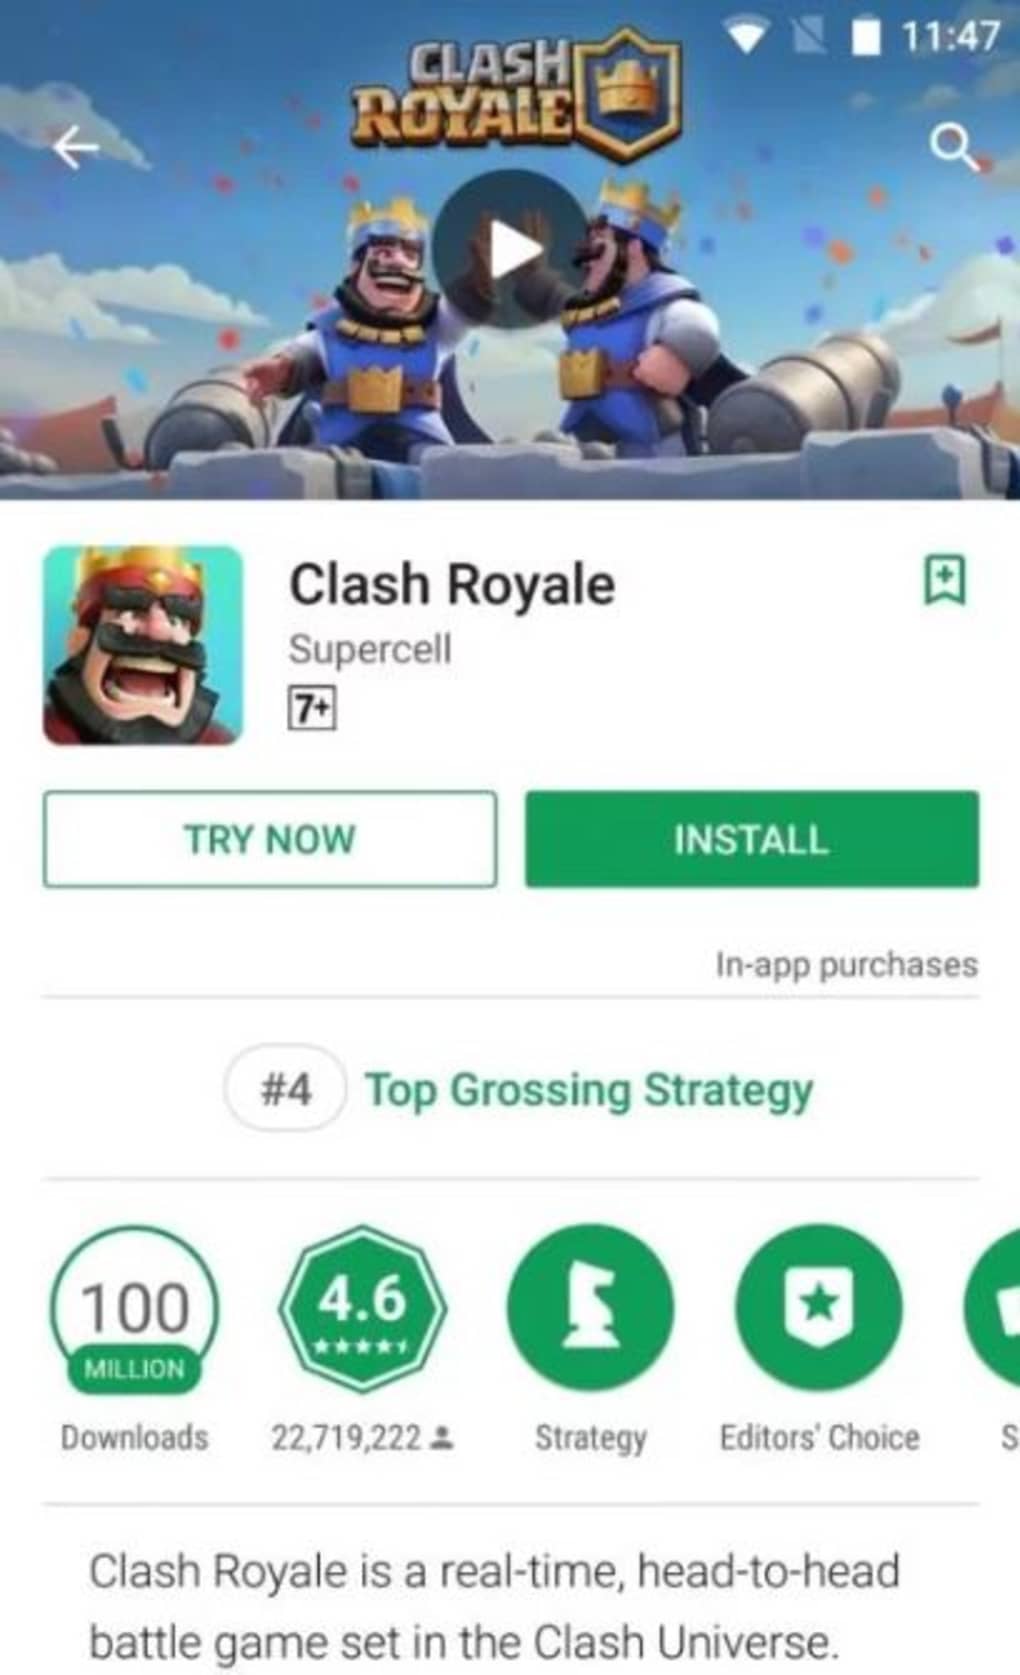 play store free online